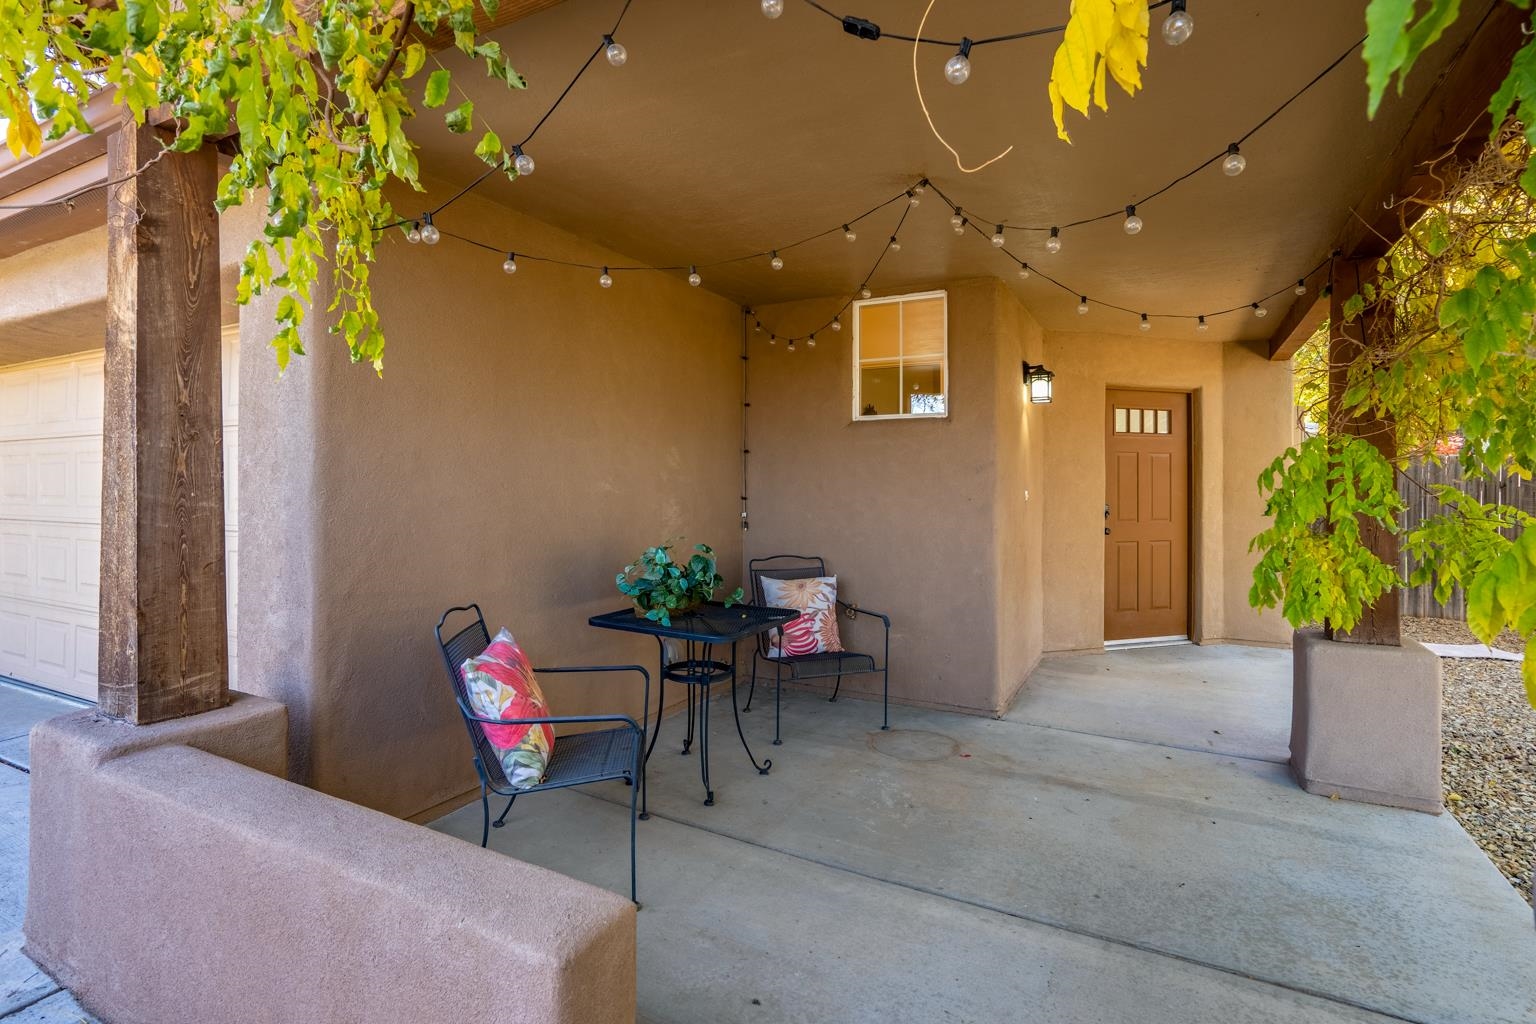 267 BRYCE, White Rock, New Mexico 87547, 3 Bedrooms Bedrooms, ,3 BathroomsBathrooms,Residential,For Sale,267 BRYCE,202104947